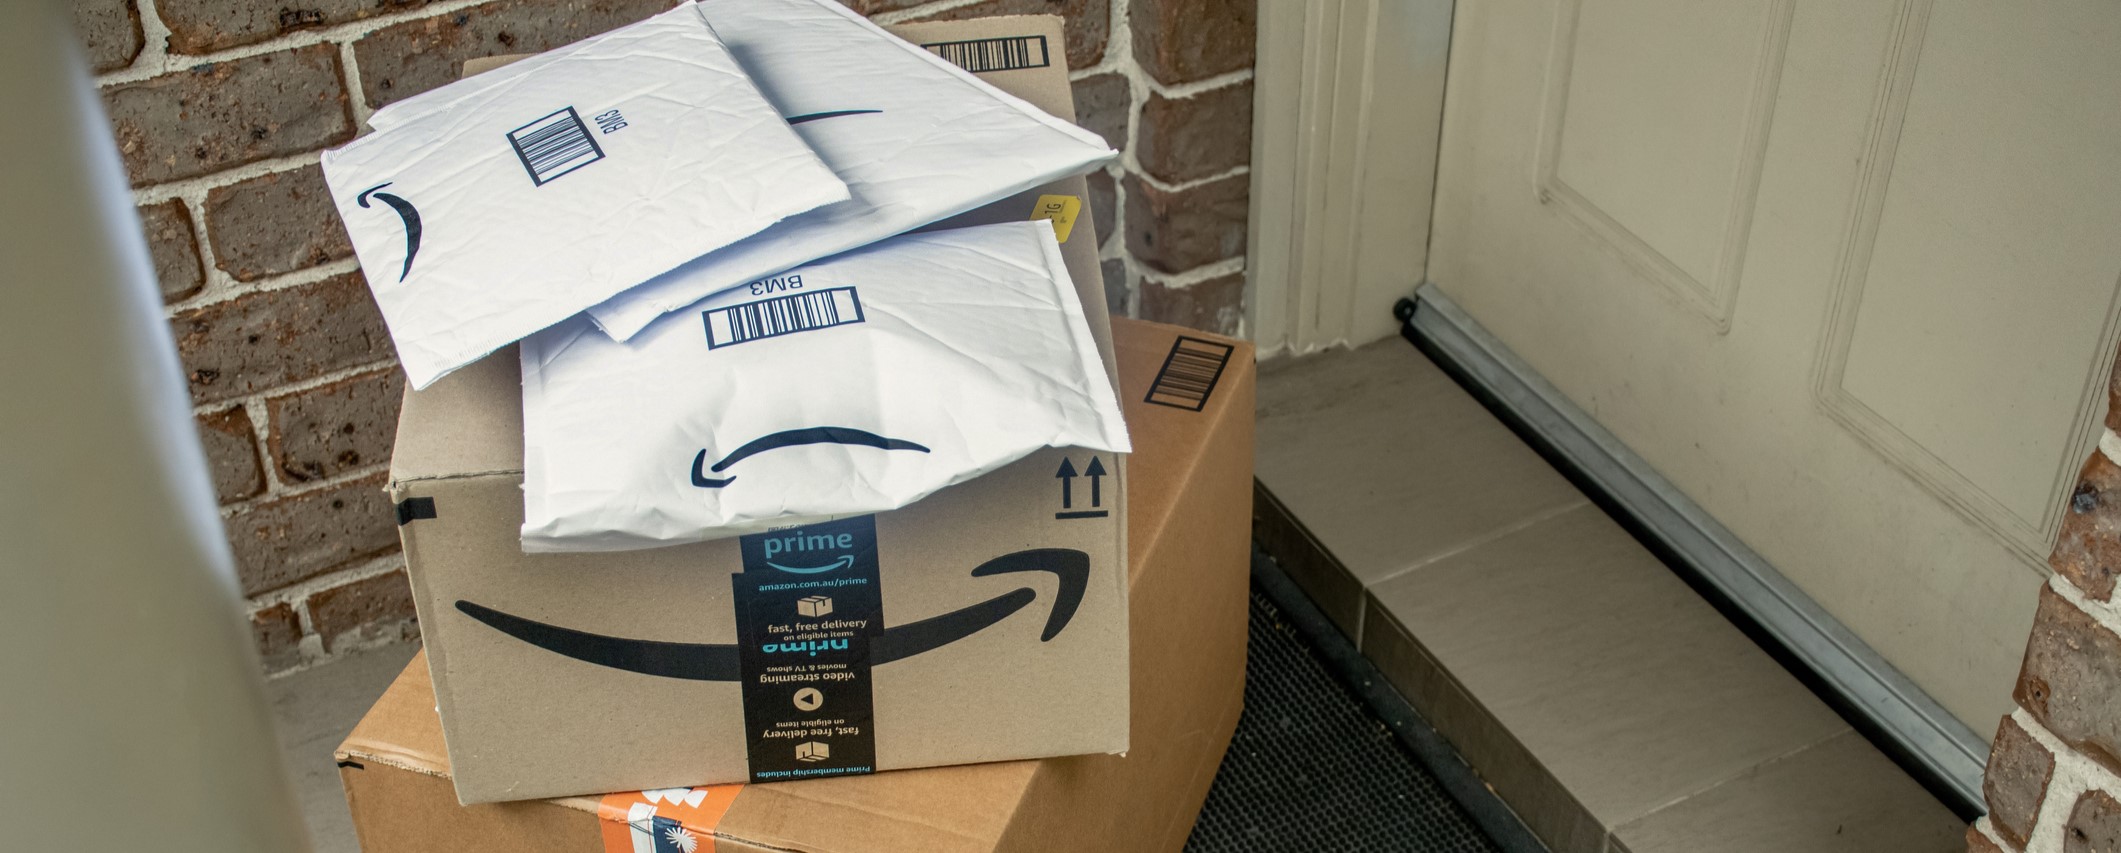 Stack of Amazon packages piled at a doorstep